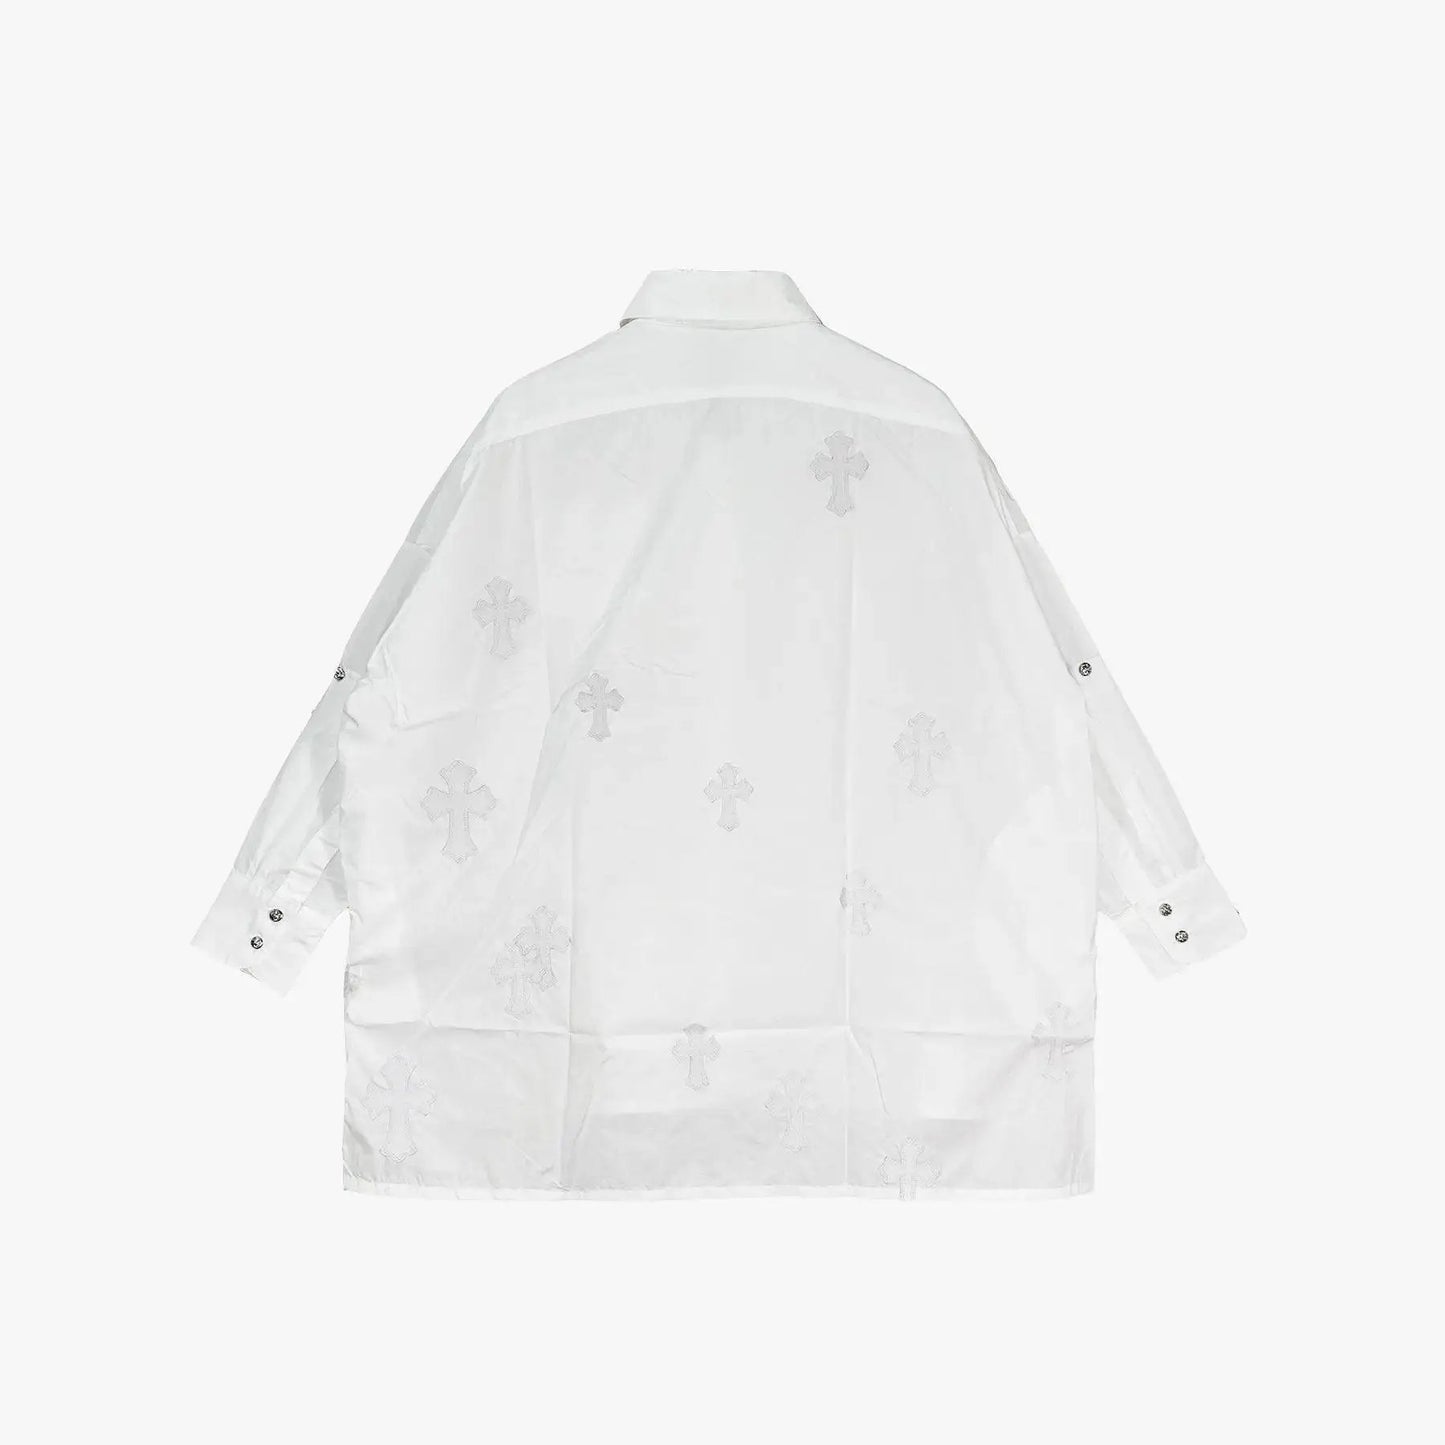 Chrome Hearts White Patent Leather Cross Relax fit Shirt - SHENGLI ROAD MARKET